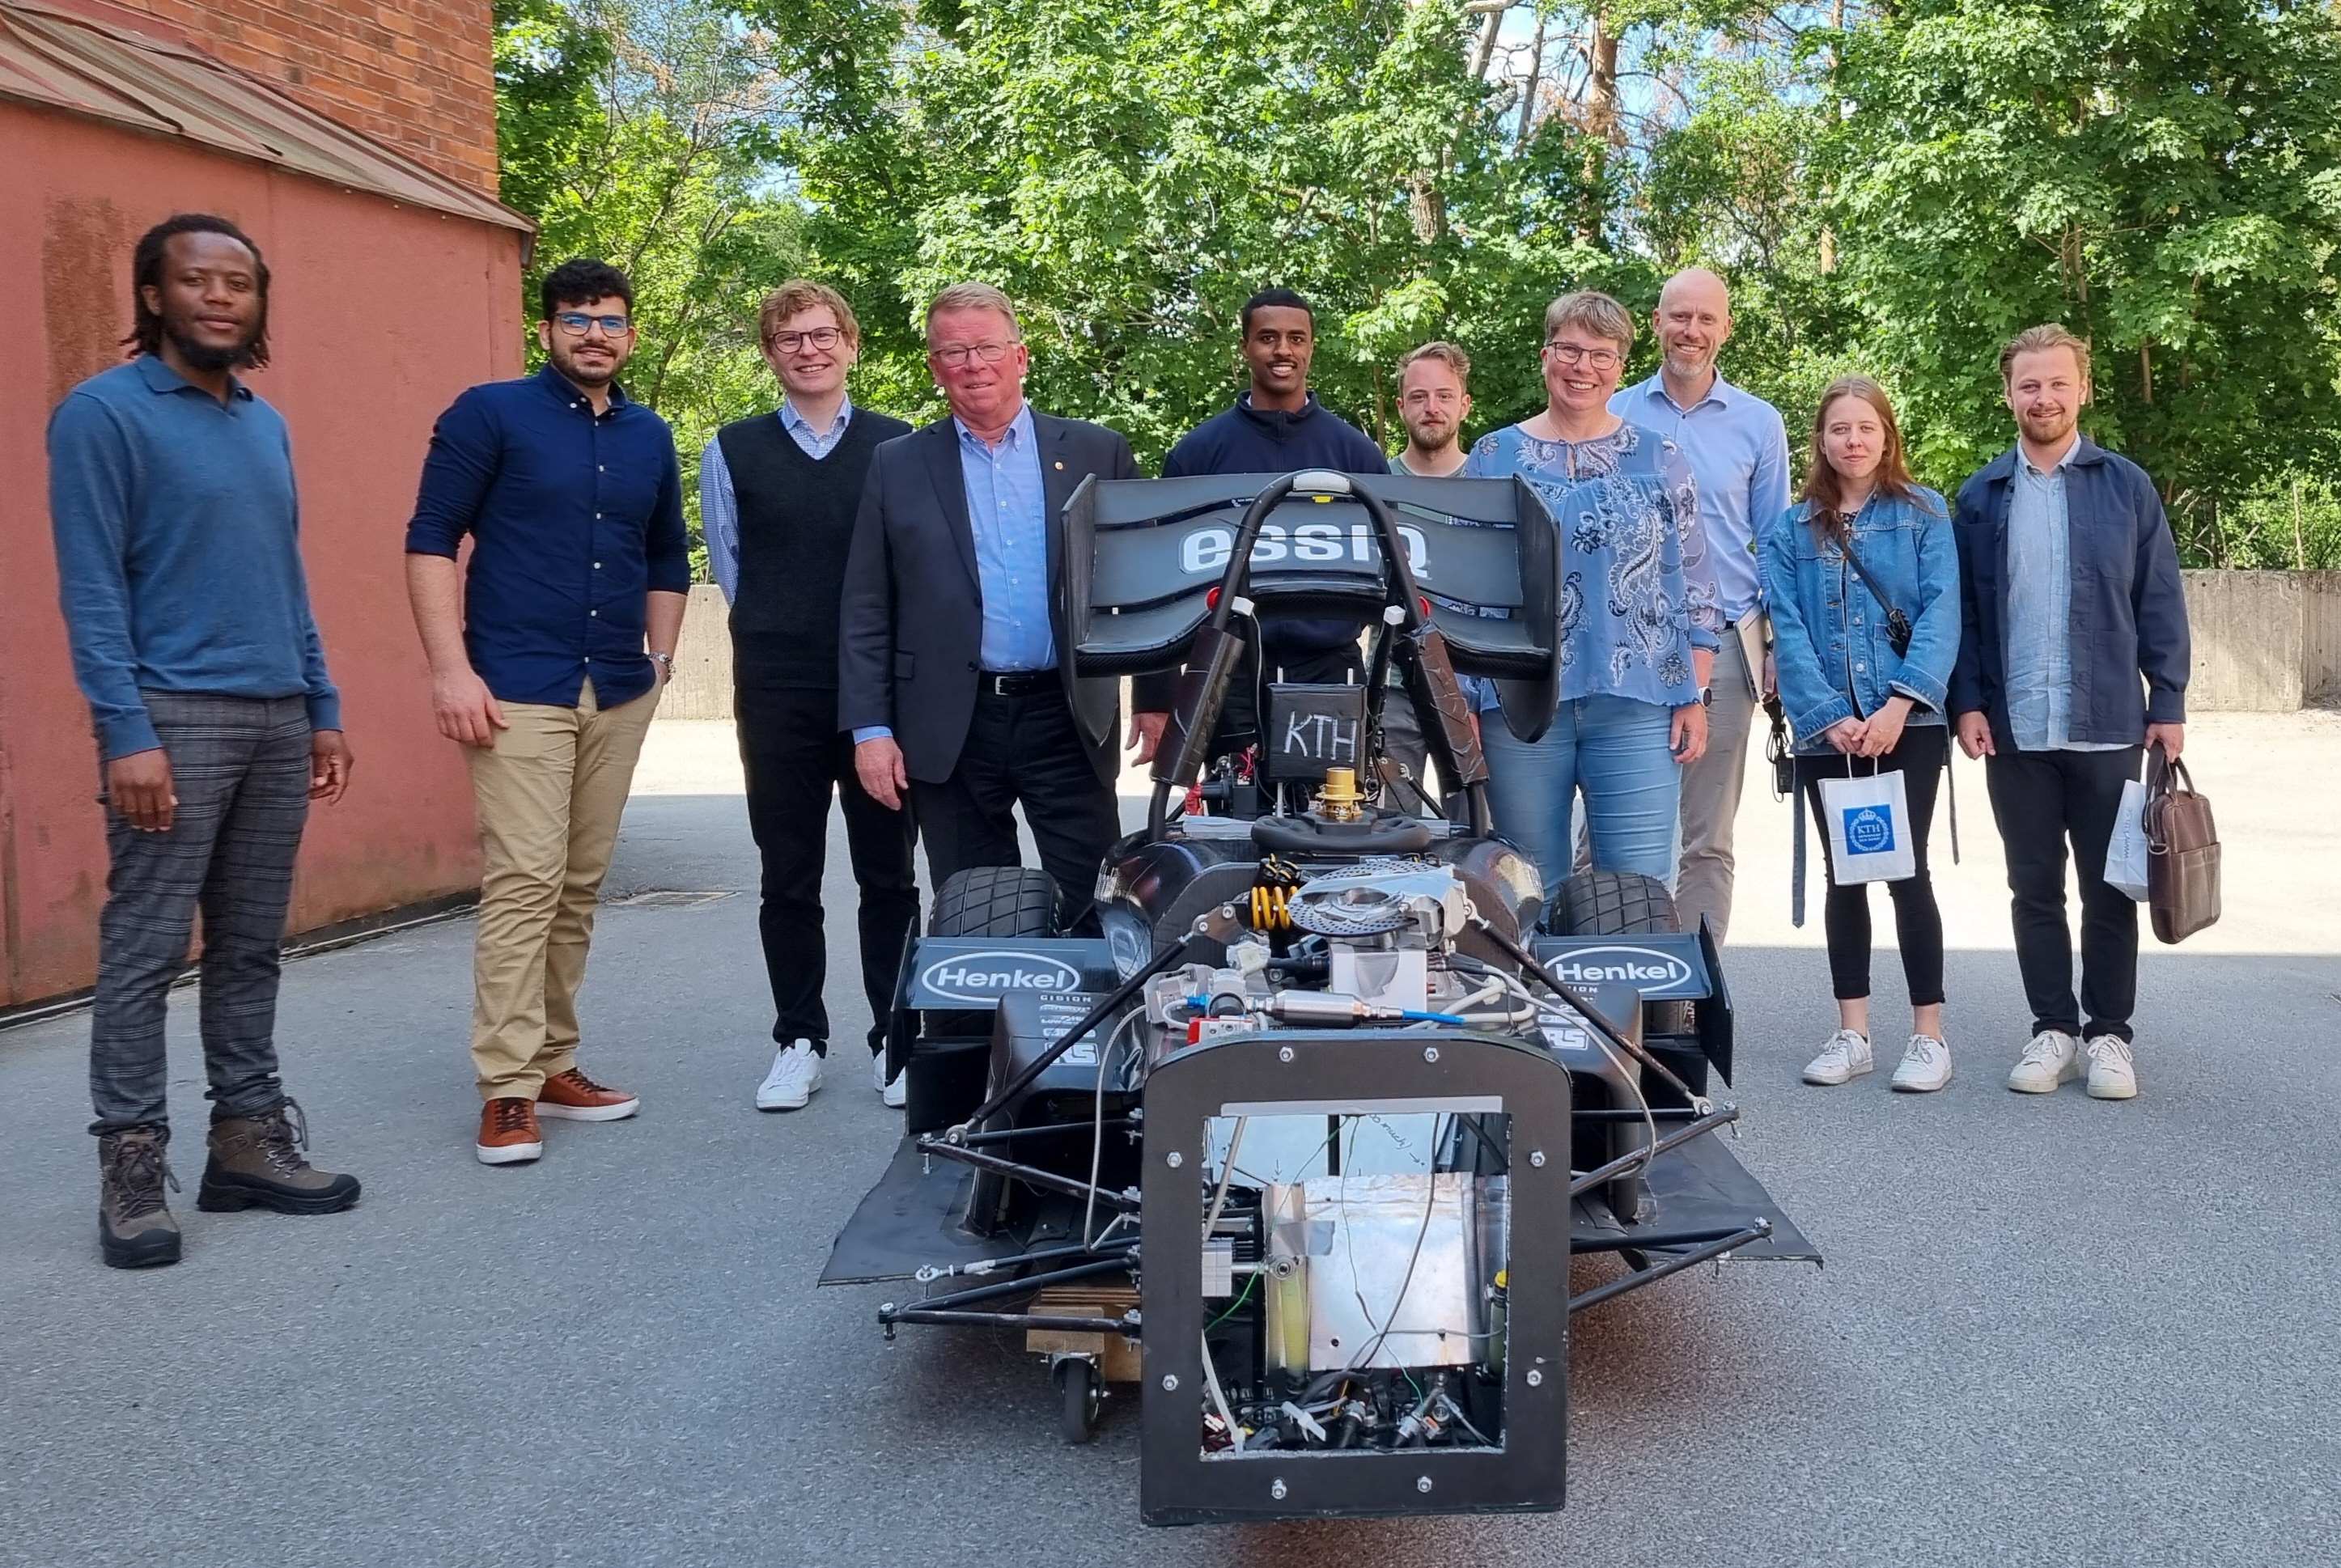 Members of KTHFS presented the project and the car at the DMMS board meeting